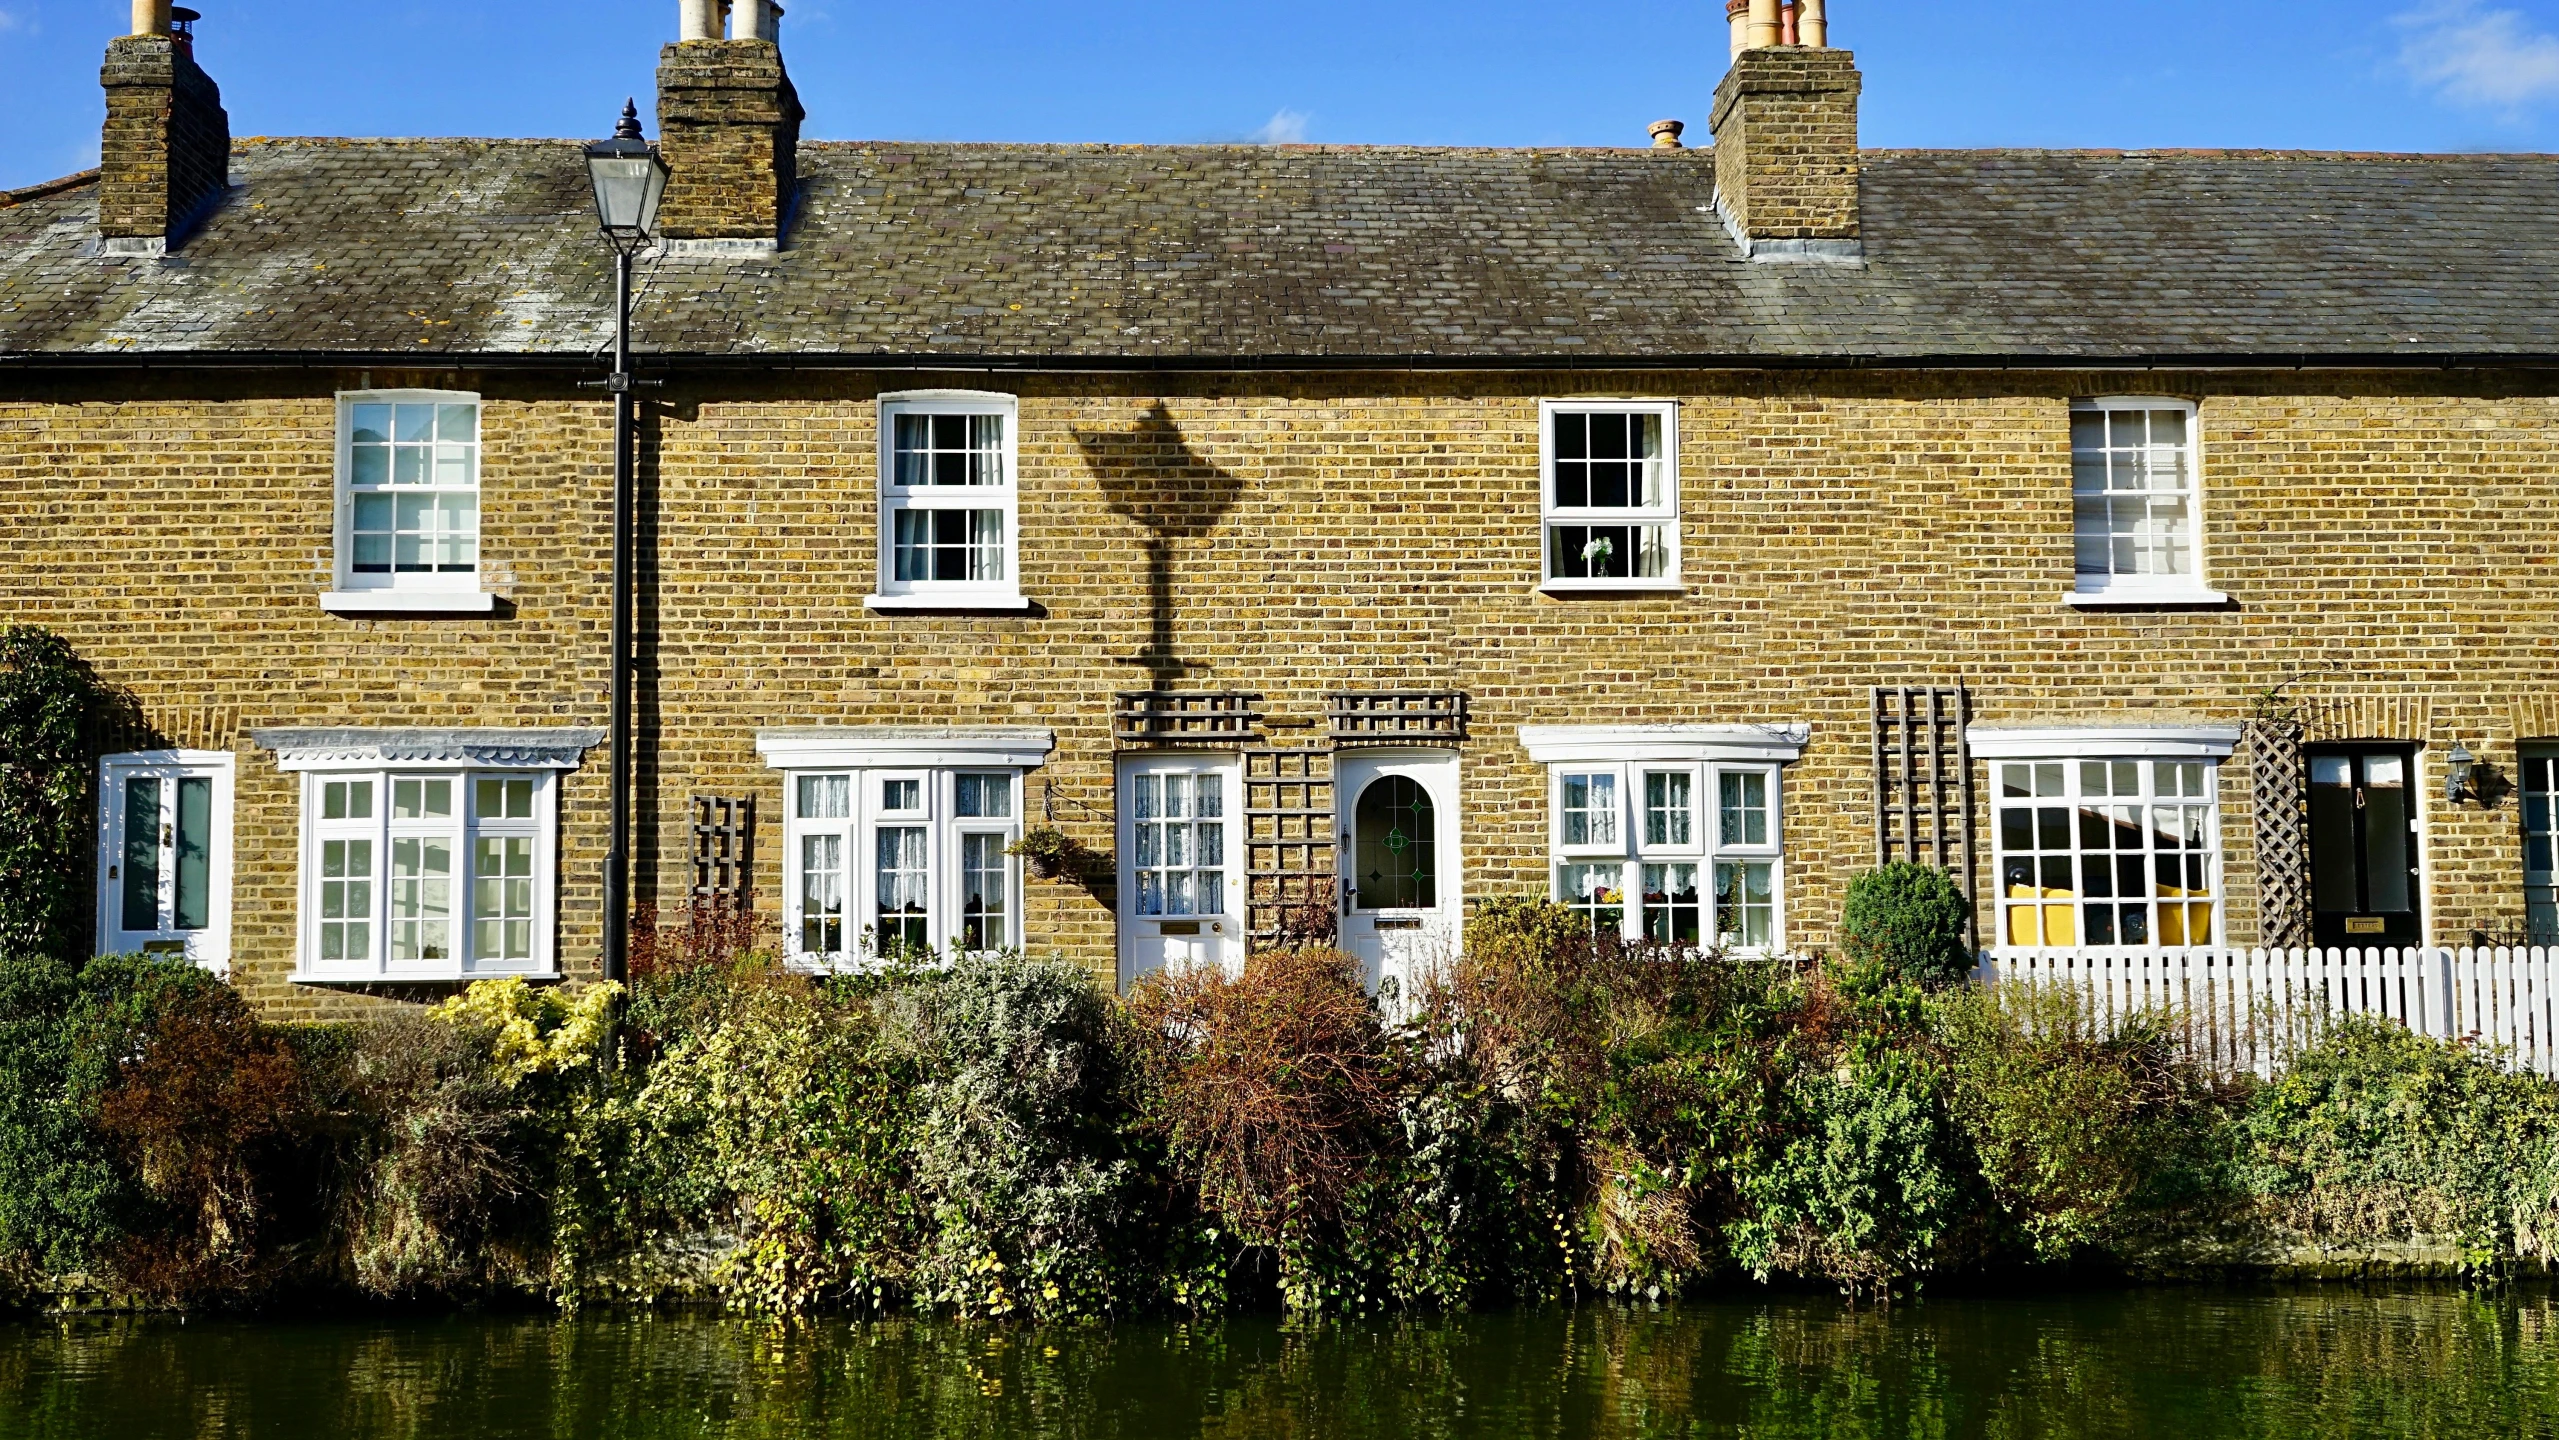 a row of houses next to a body of water, by Carey Morris, pixabay, arts and crafts movement, golden windows, an estate agent listing photo, canals, 2 0 0 0's photo